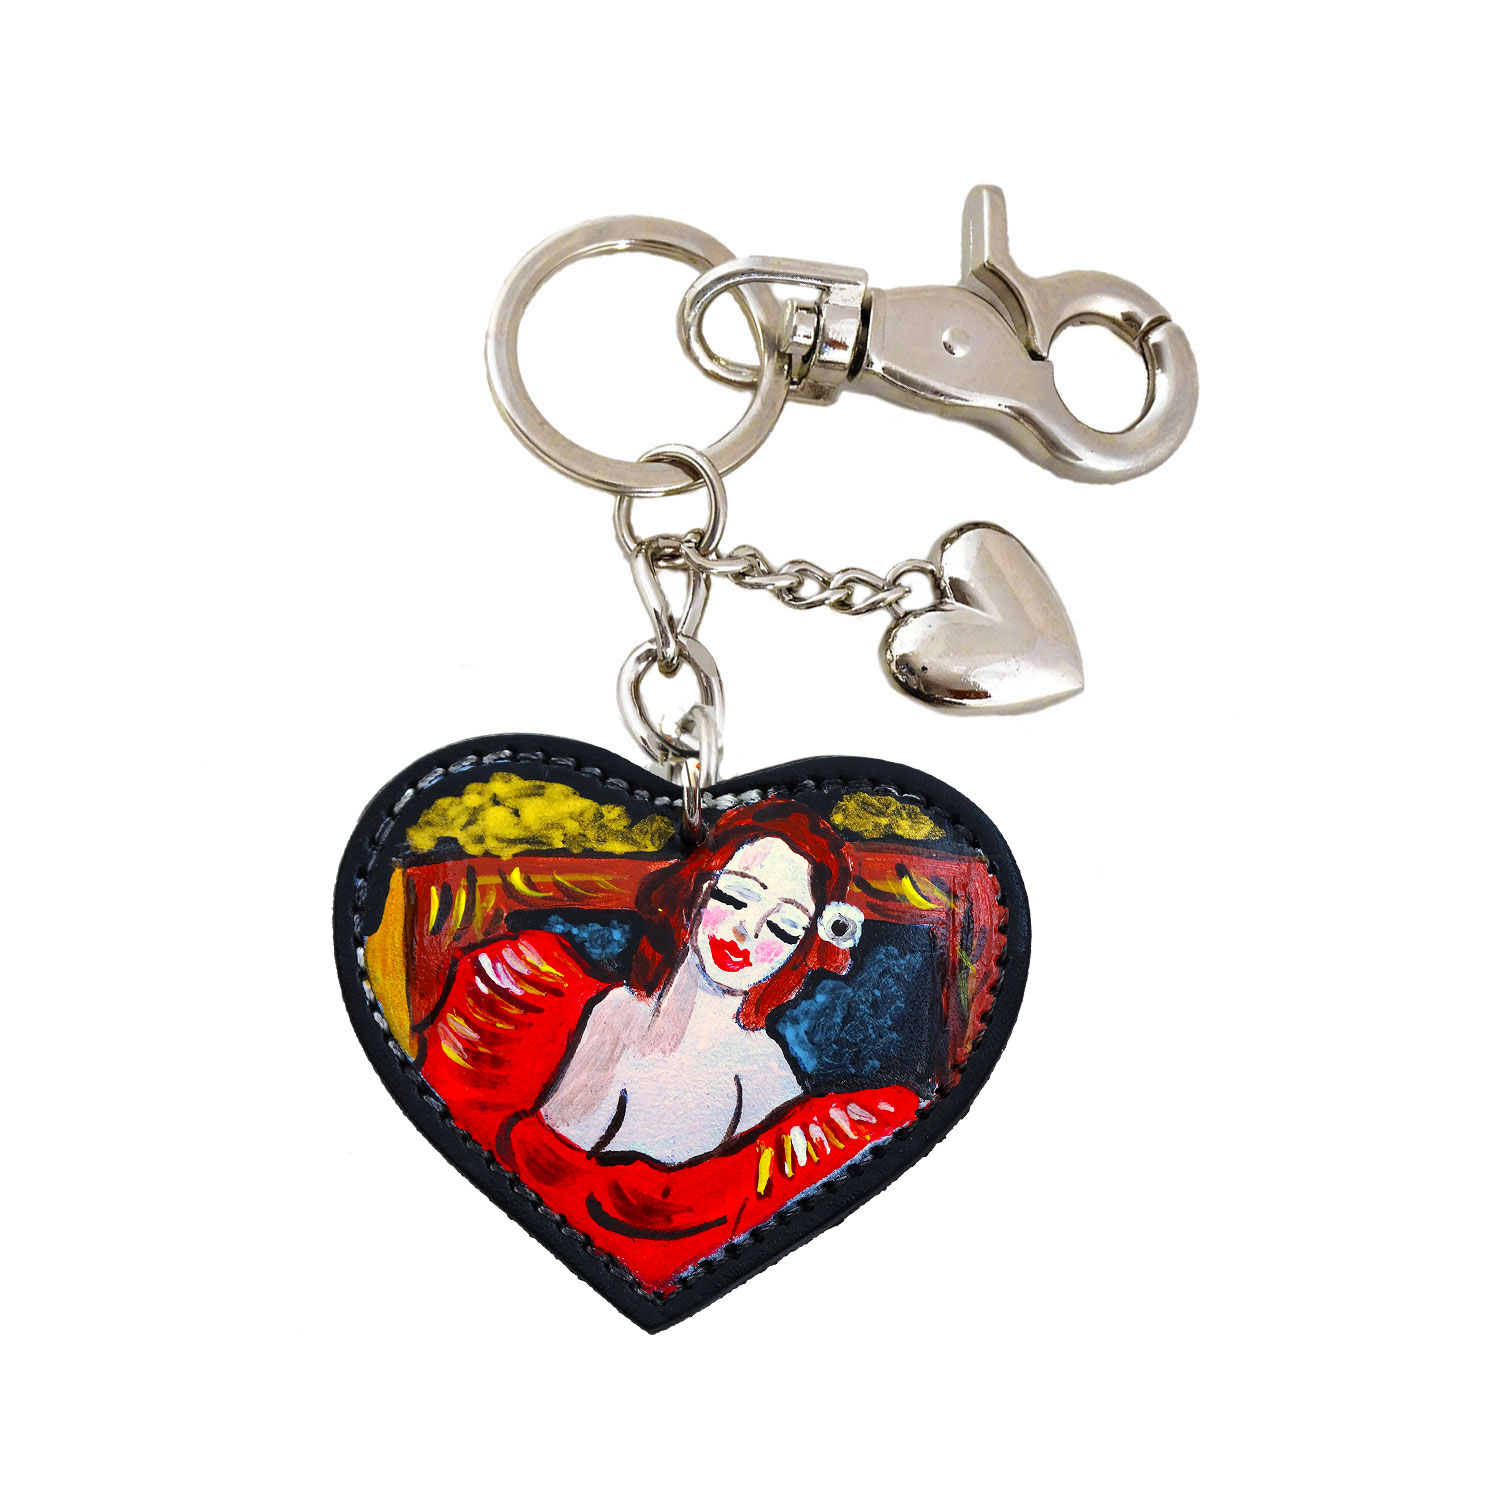 Hand painted keychain – Picture girl